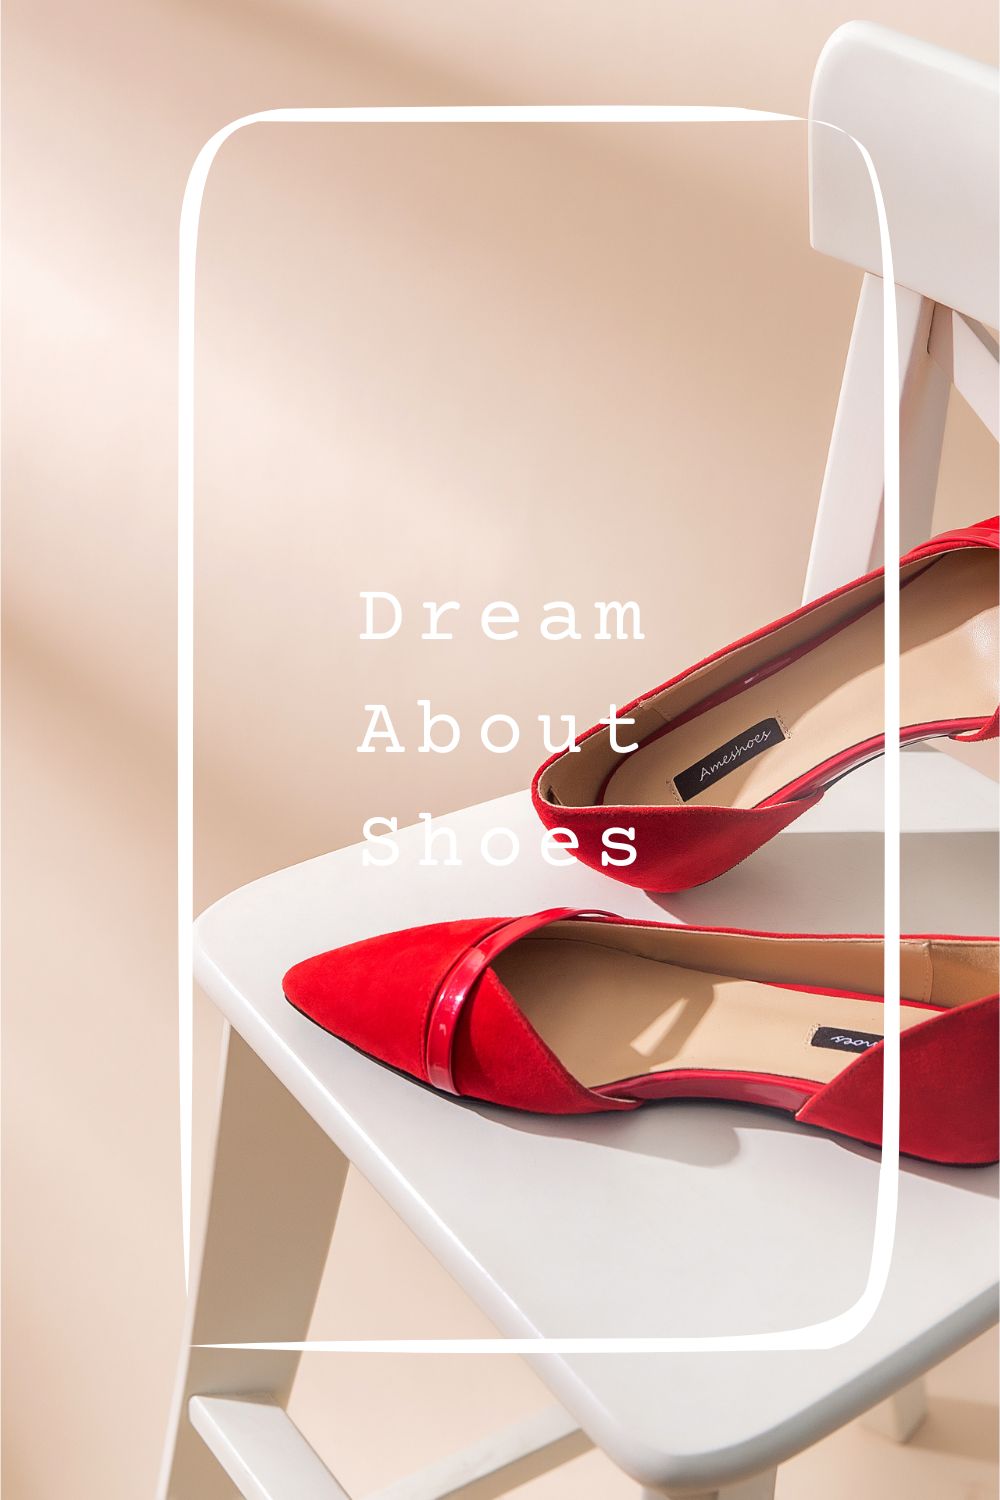 25 Shoes Dream Meaning and Symbolism Interpretations